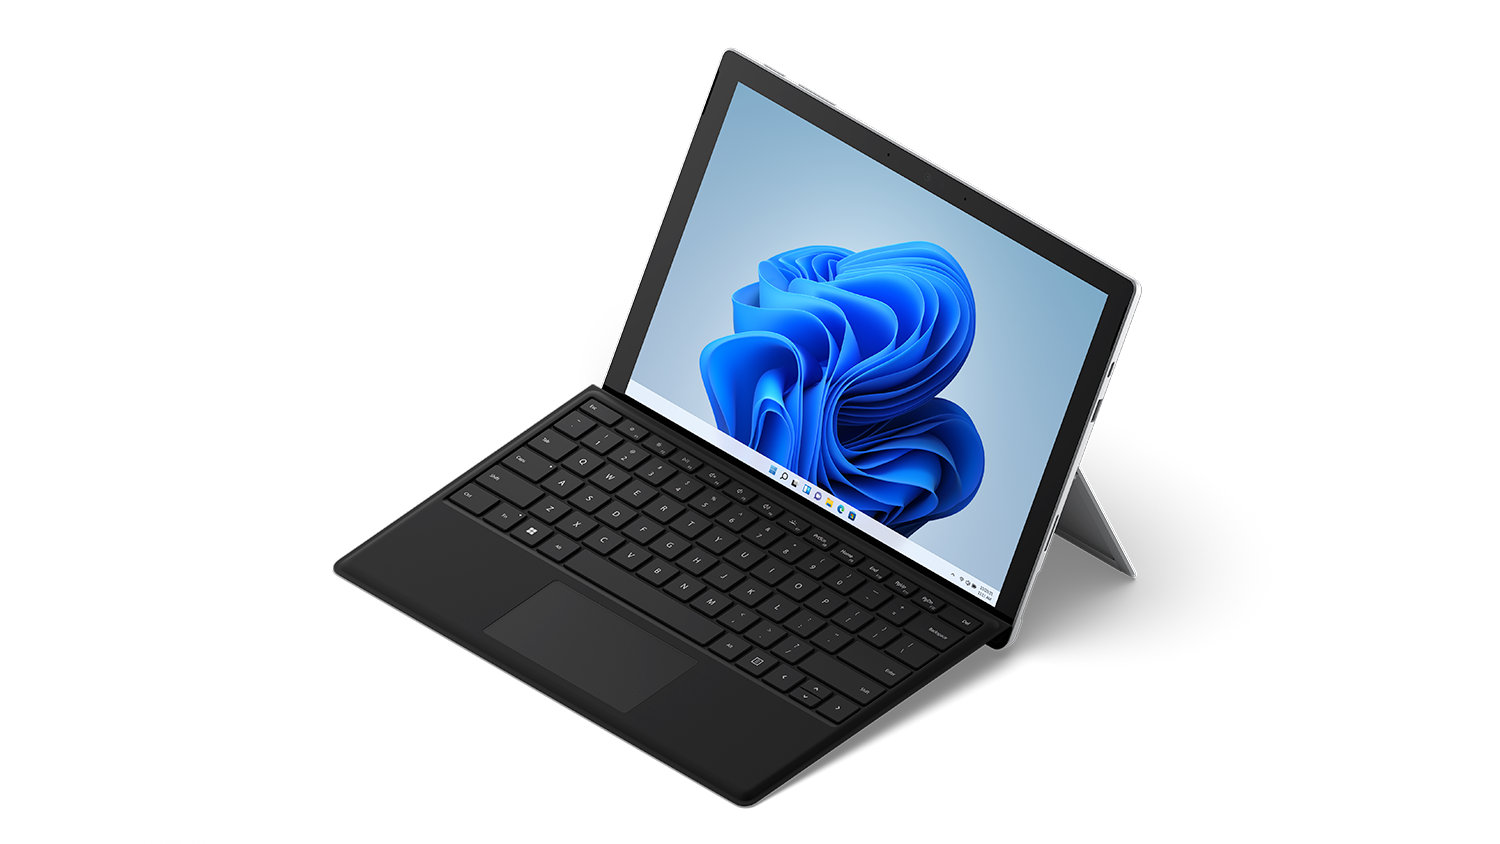 Surface Pro 7+ shown as a laptop with Typ Cover, Pen and Kickstand.